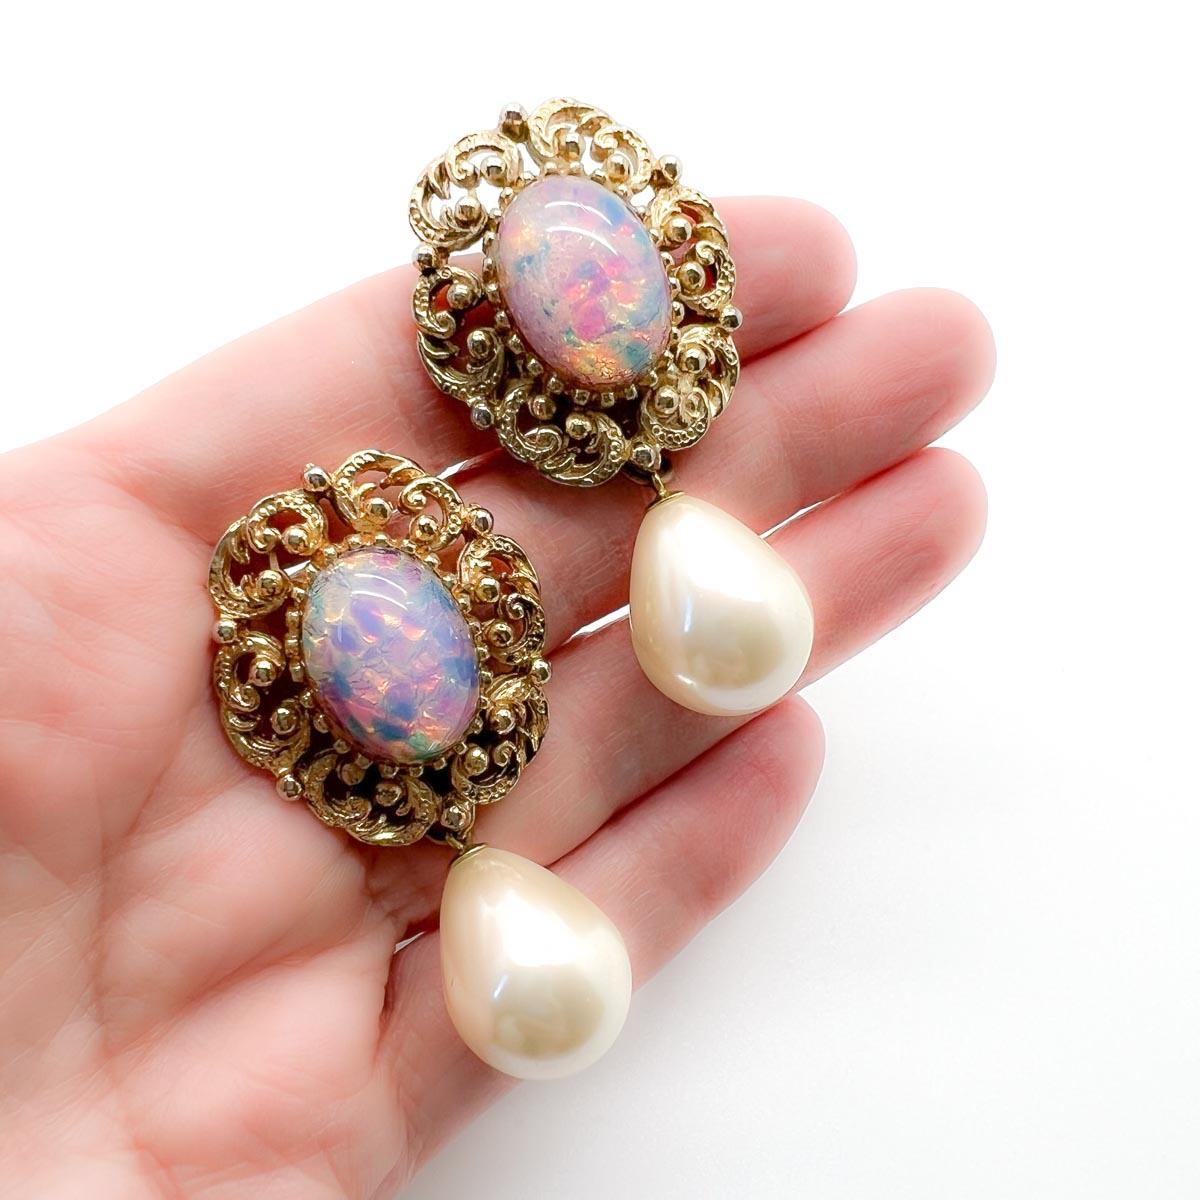 A beautiful pair of Vintage Opal Glass Earrings. A large scrolled framed opalescent cabochon stone gives way to a lustrous whole drop pearl for that timeless finish. The perfect pair of earrings to add a wonderfully feminine finishing touch.
An